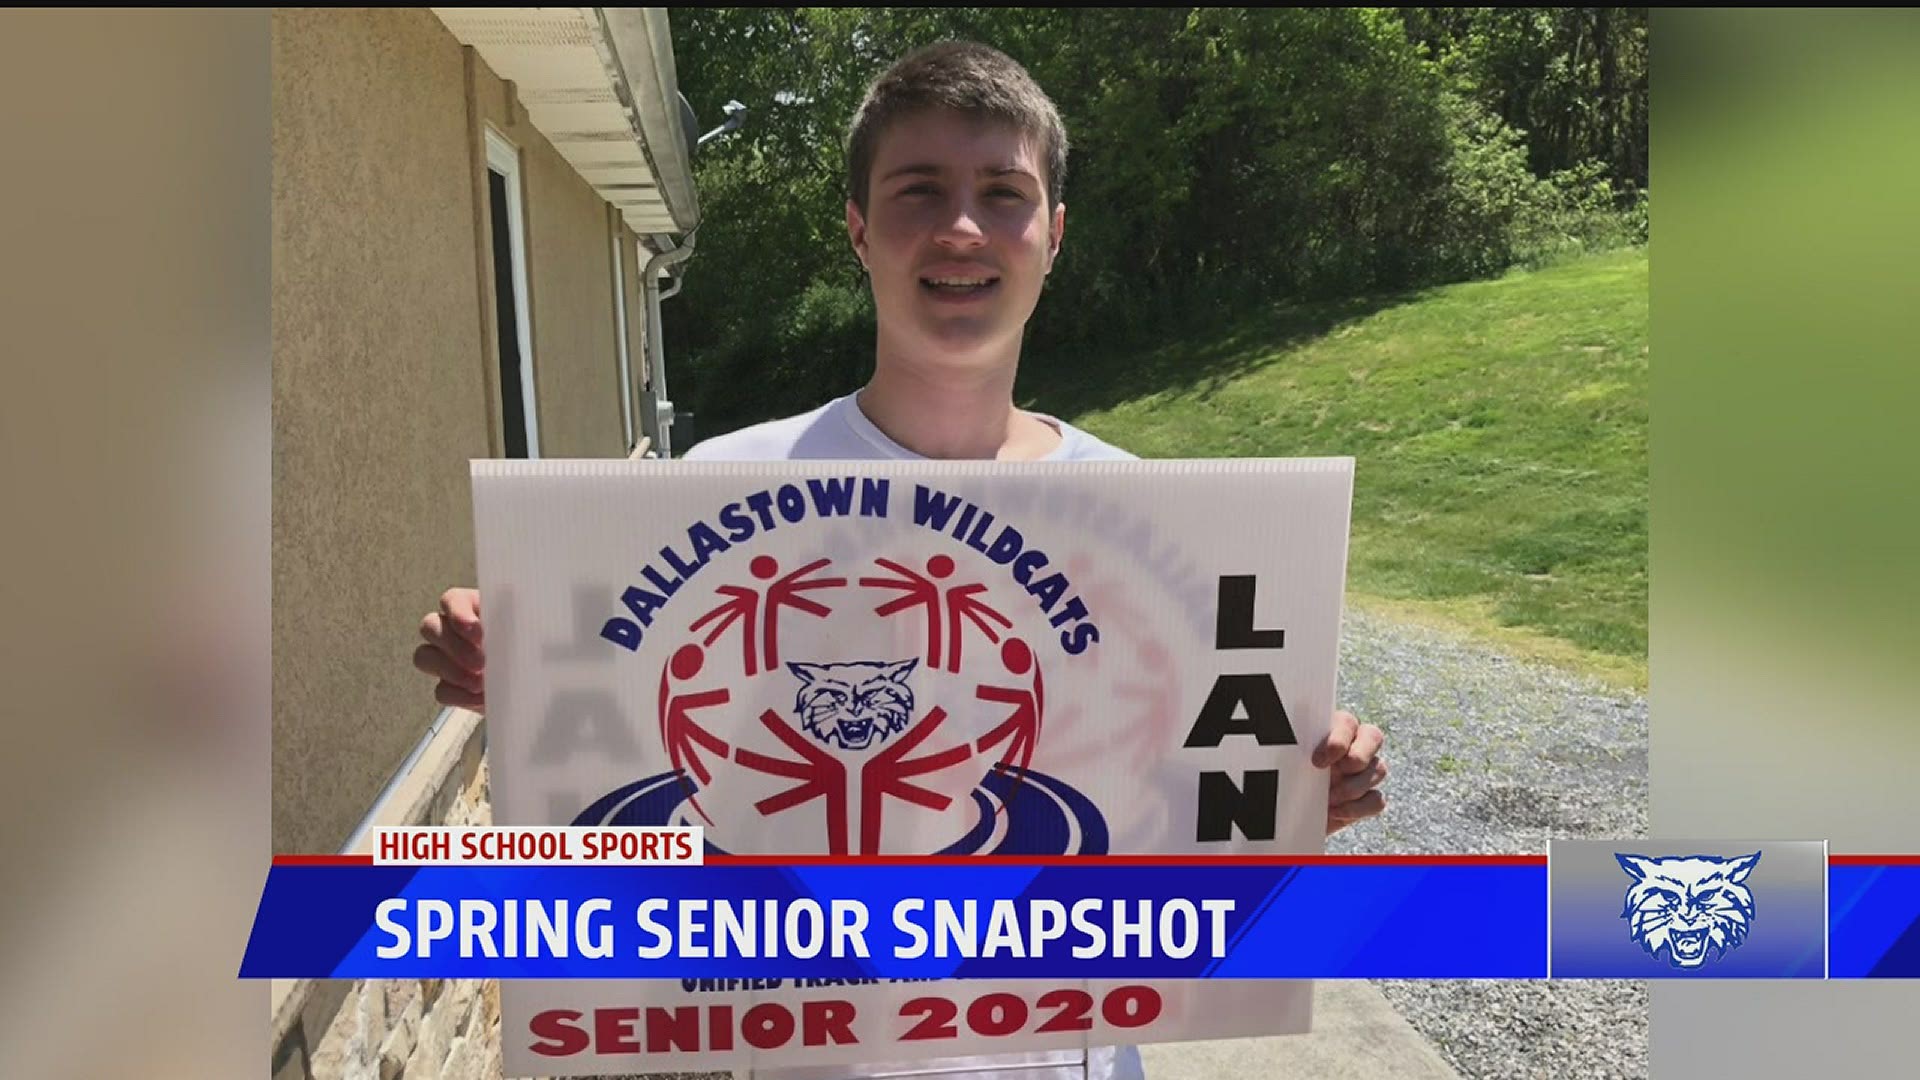 Our spring senior snapshot is of Lane Strausbaugh of the Dallastown Unified Track Team